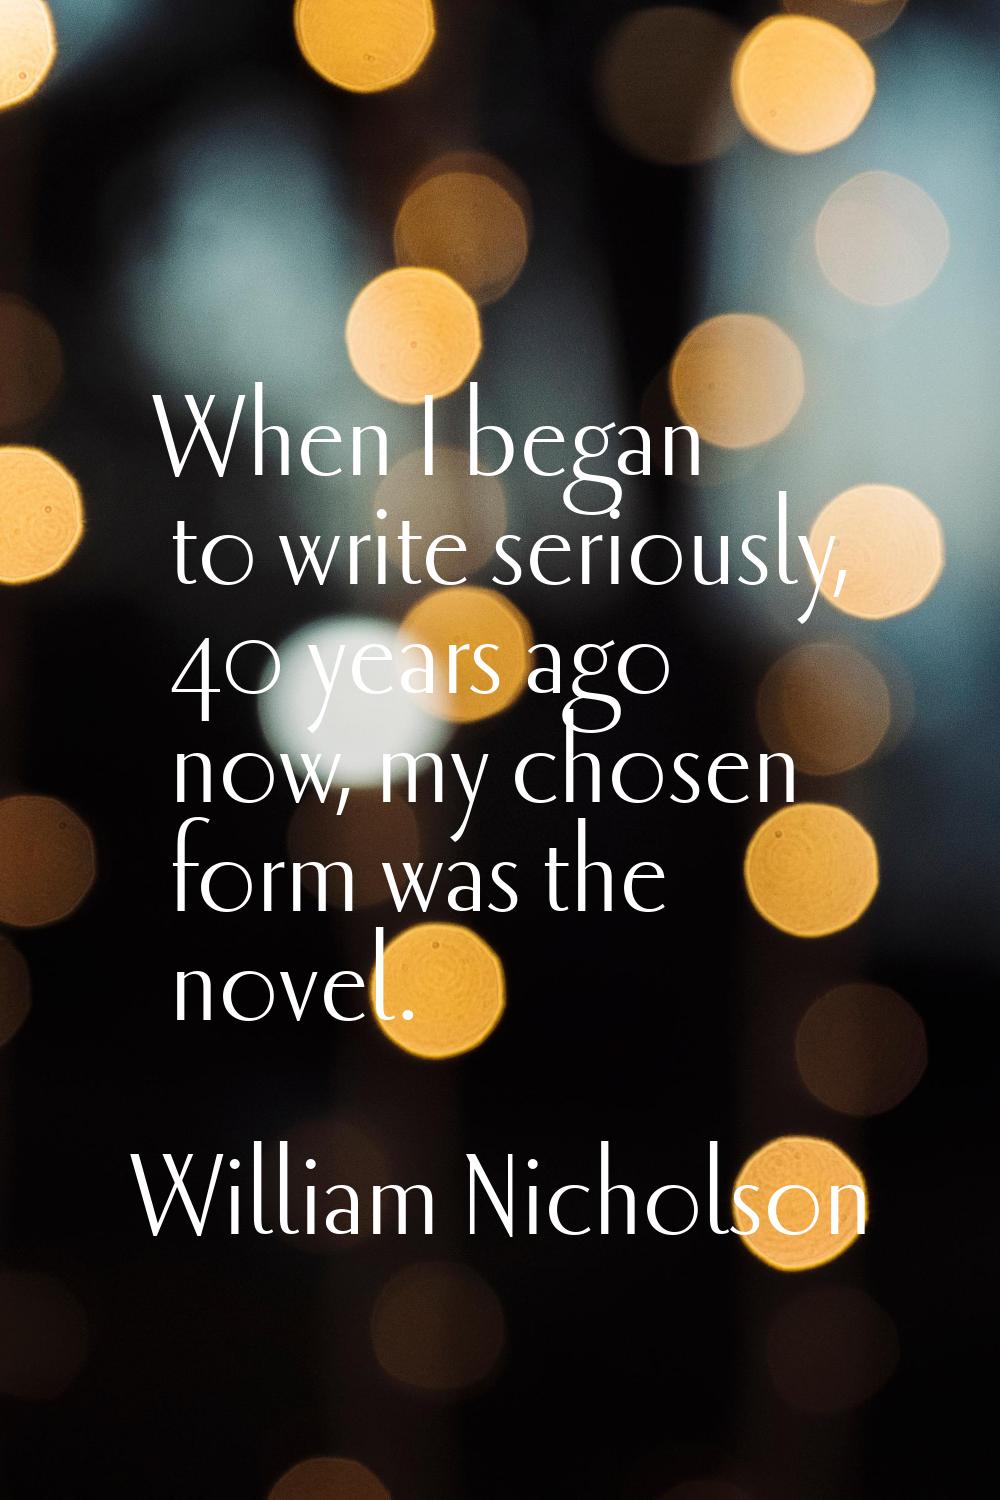 When I began to write seriously, 40 years ago now, my chosen form was the novel.